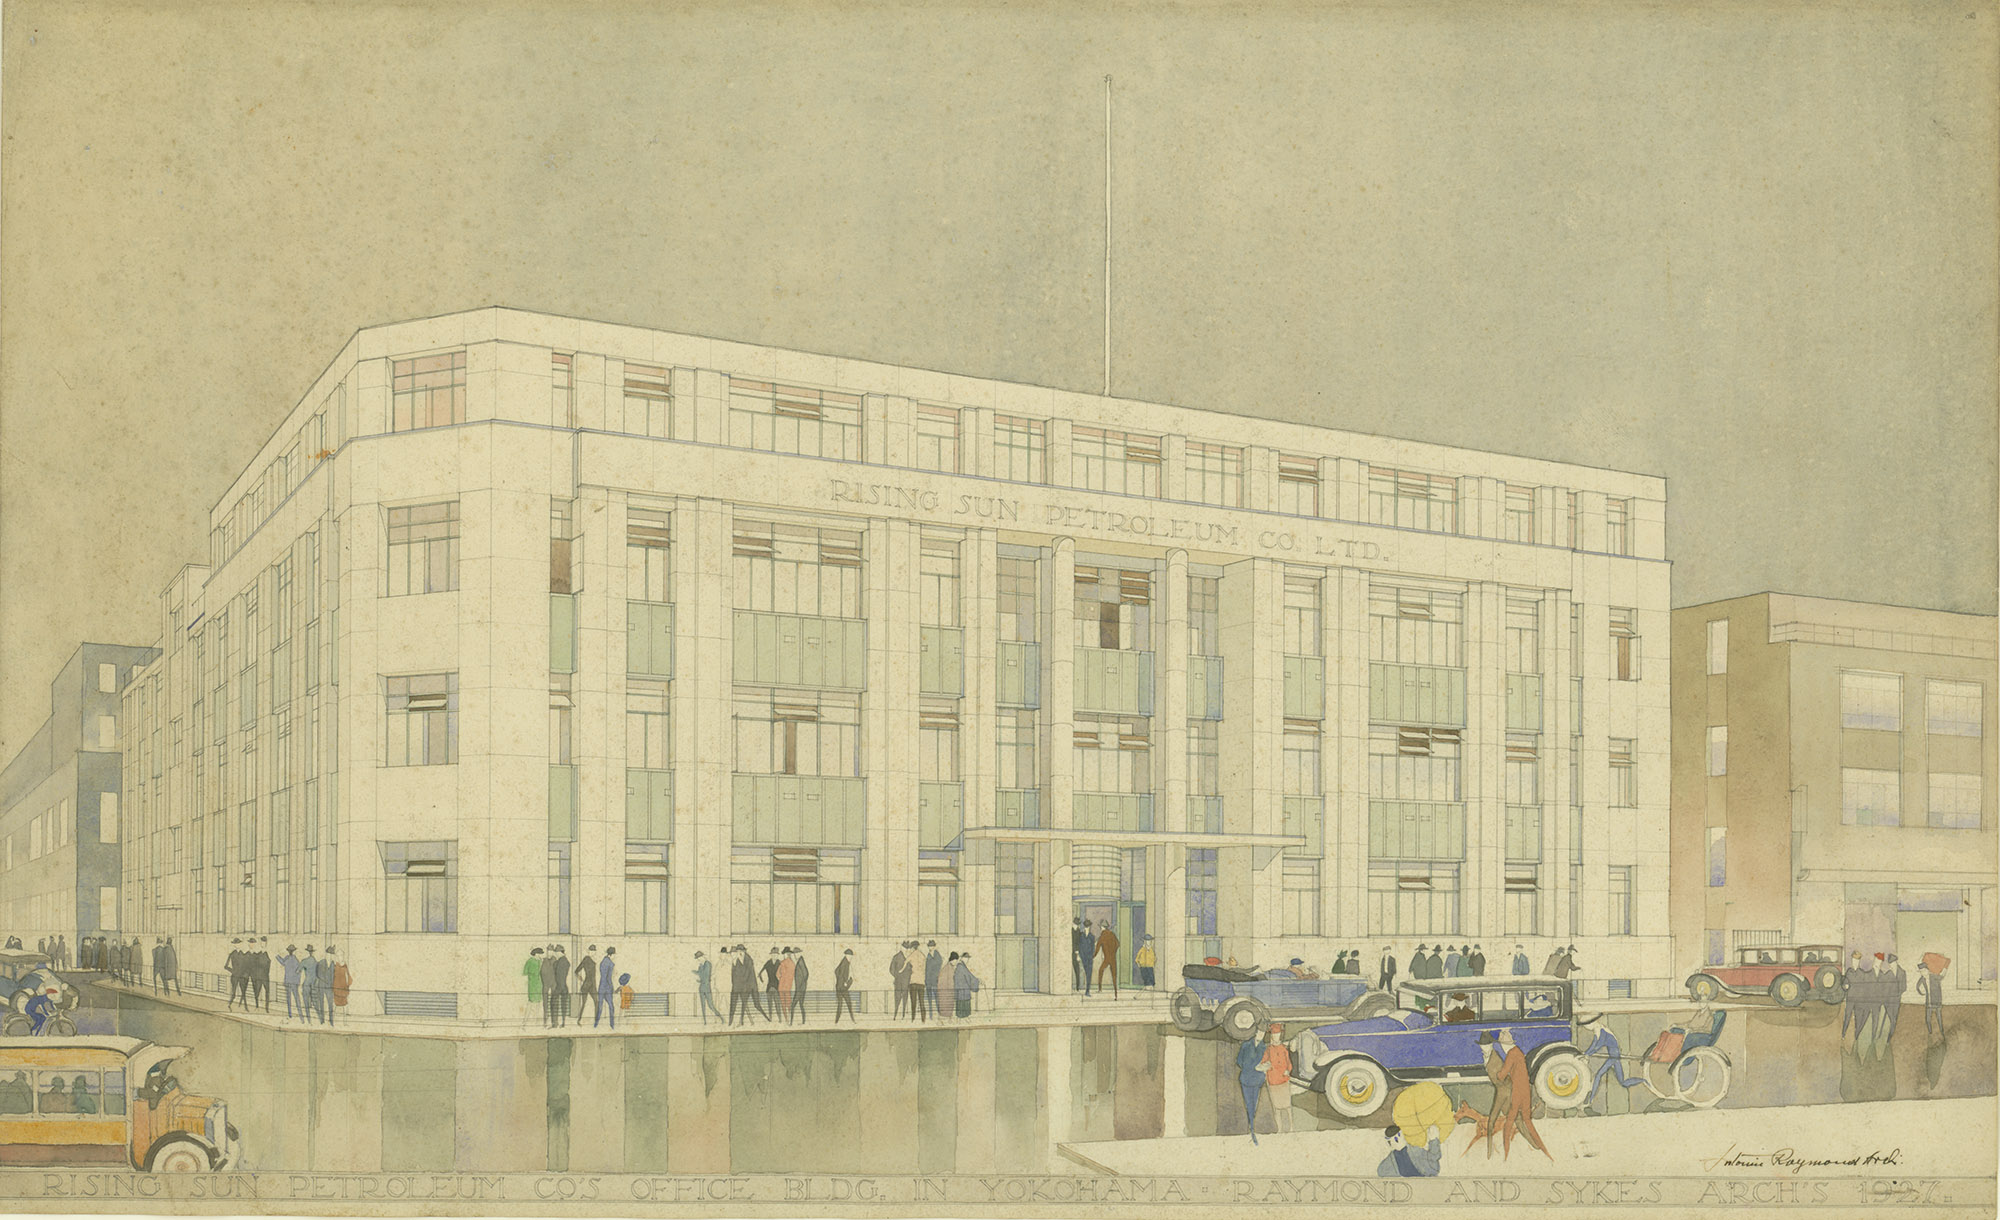 Warter color perspective drawing for the Rising Sun Building in Japan